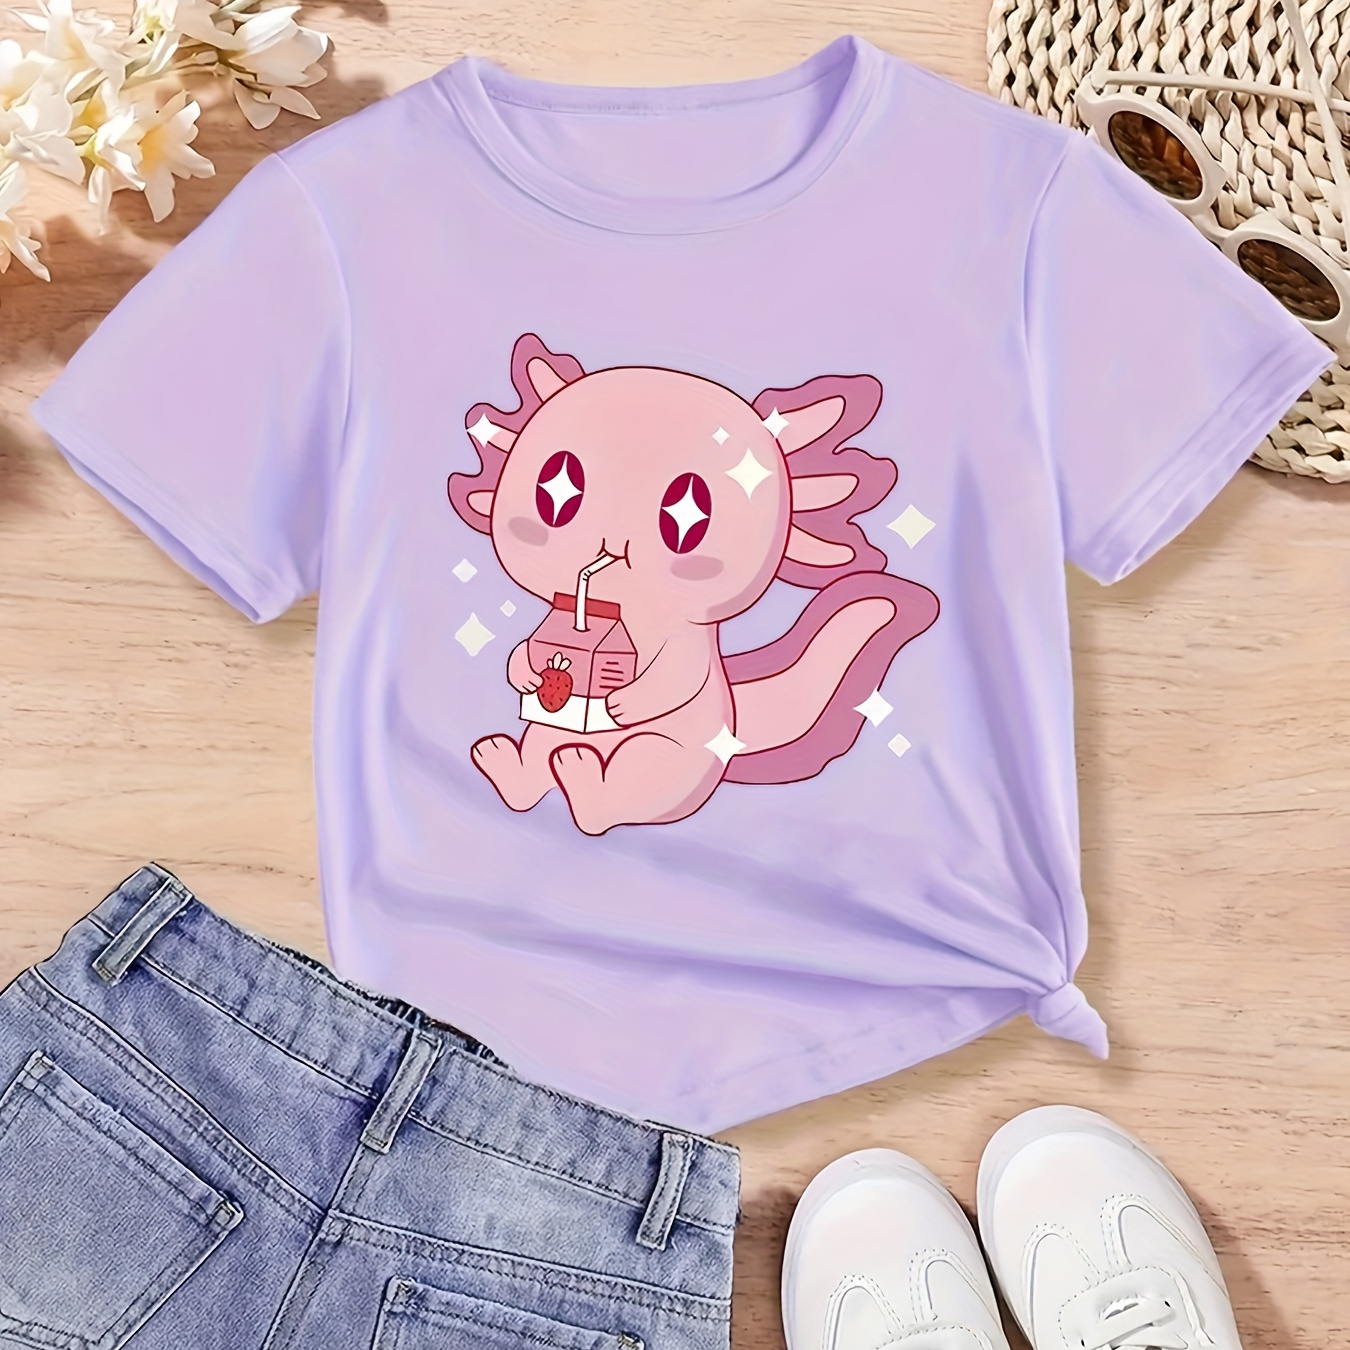 

Fun 'axolotl Drinking Strawberry Milk' Summer Graphic T-shirt For Girls, Cotton Comfy Short Sleeve Tee For A Trendy Look!